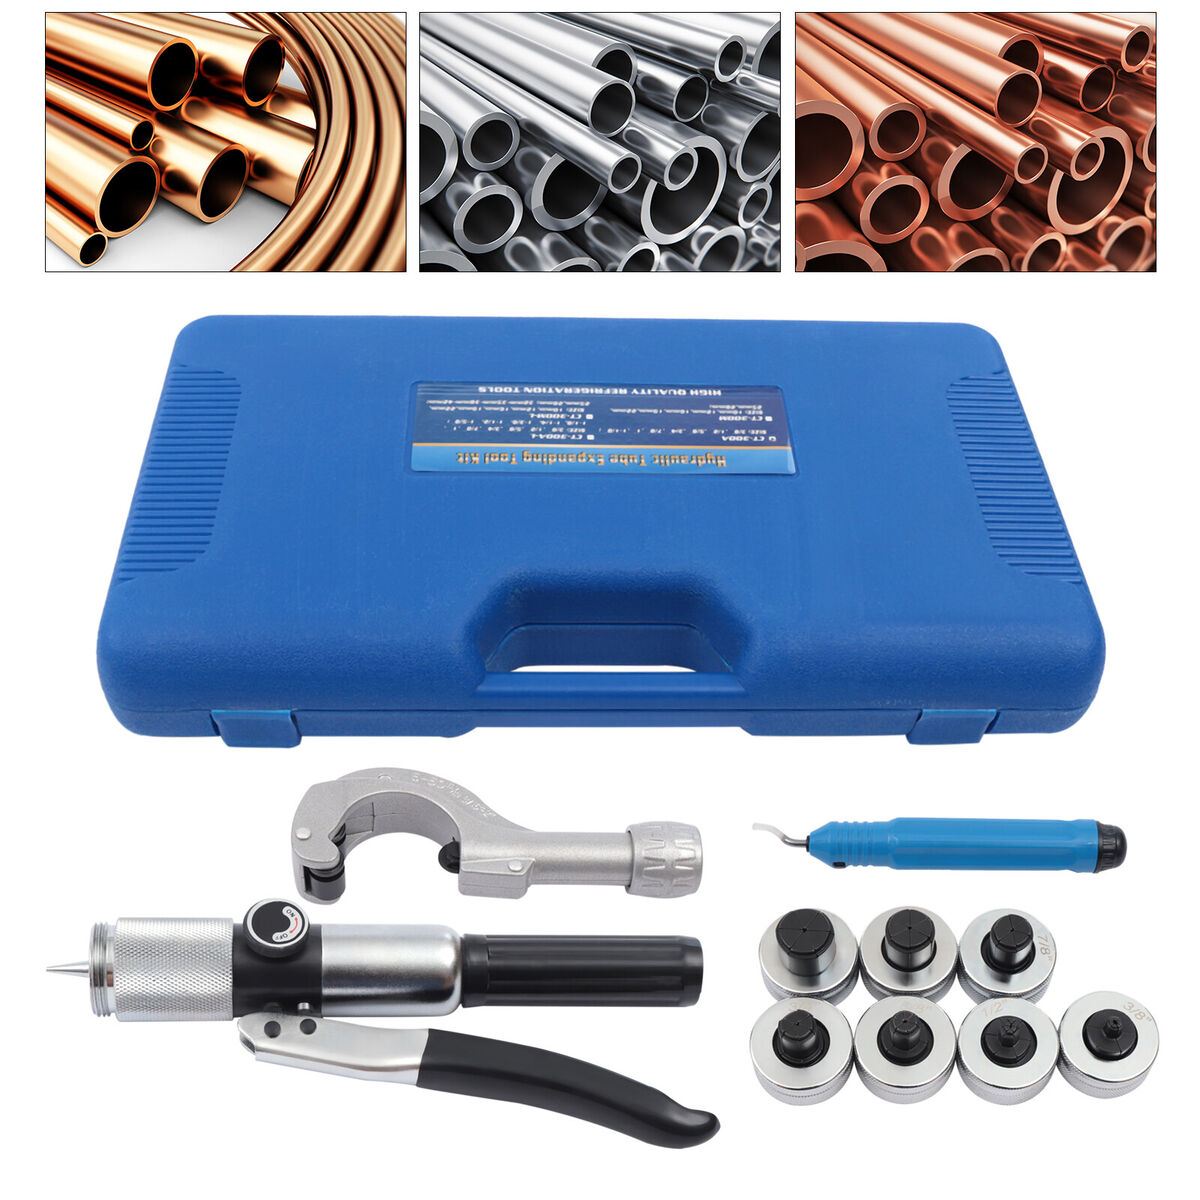 Hydraulic Expander SWAGING Tool Kit 3/8#034;~1-1/8#034; Copper Tube  Expander Tool CT-300 eBay